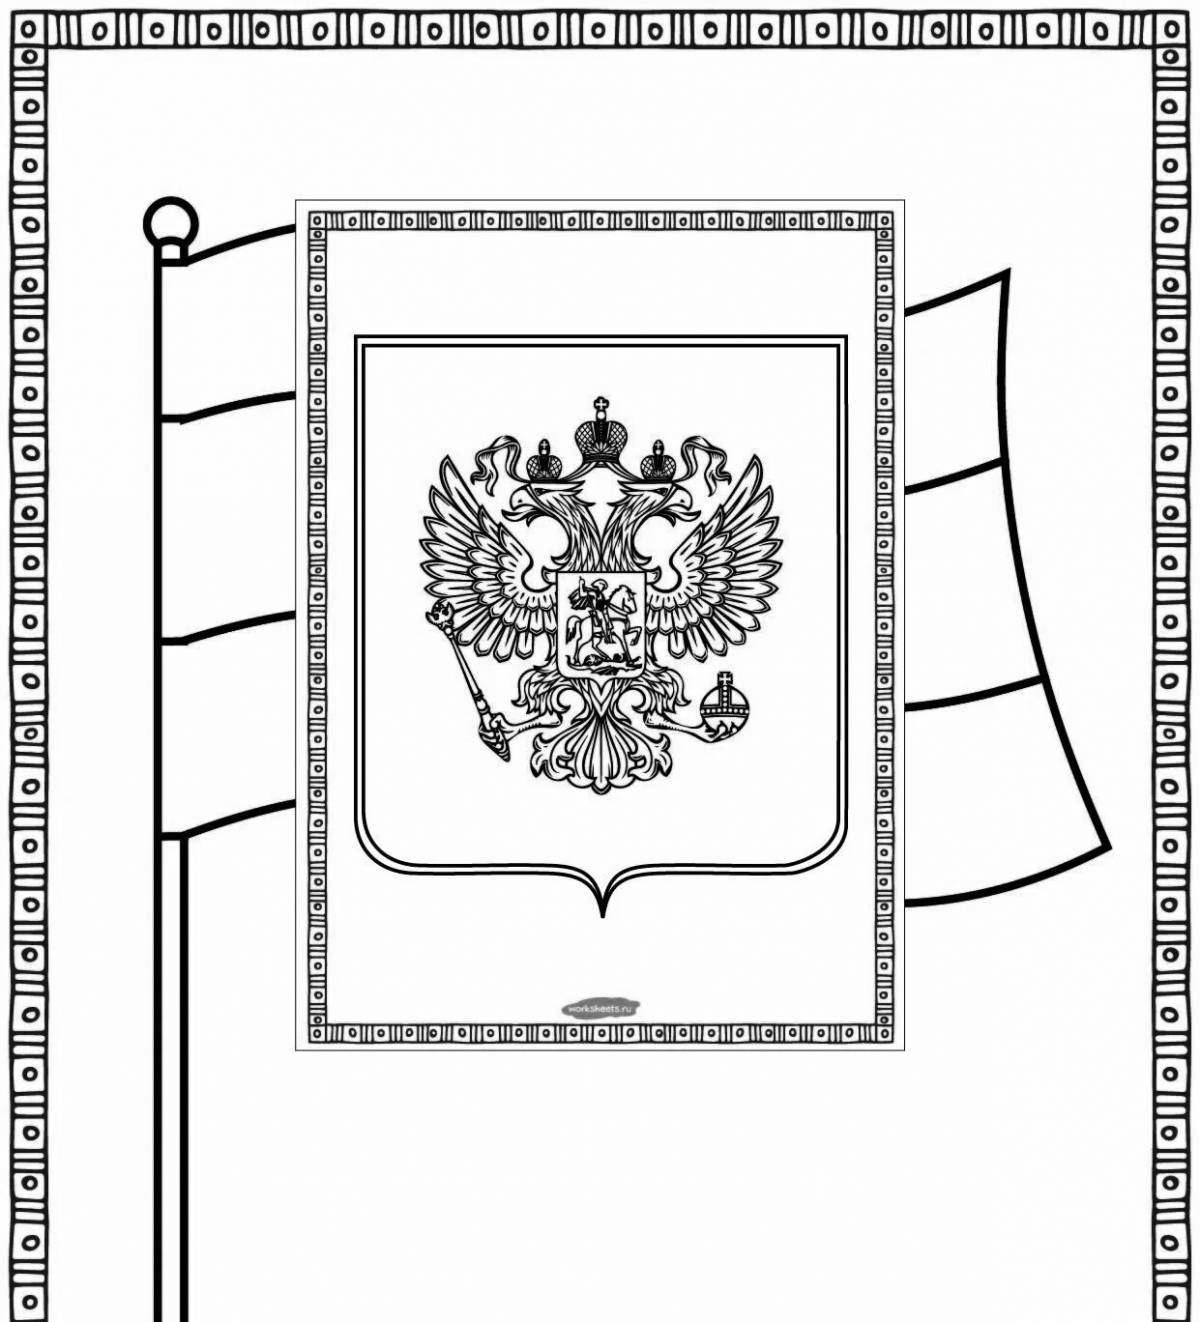 Bright flag and coat of arms of Russia